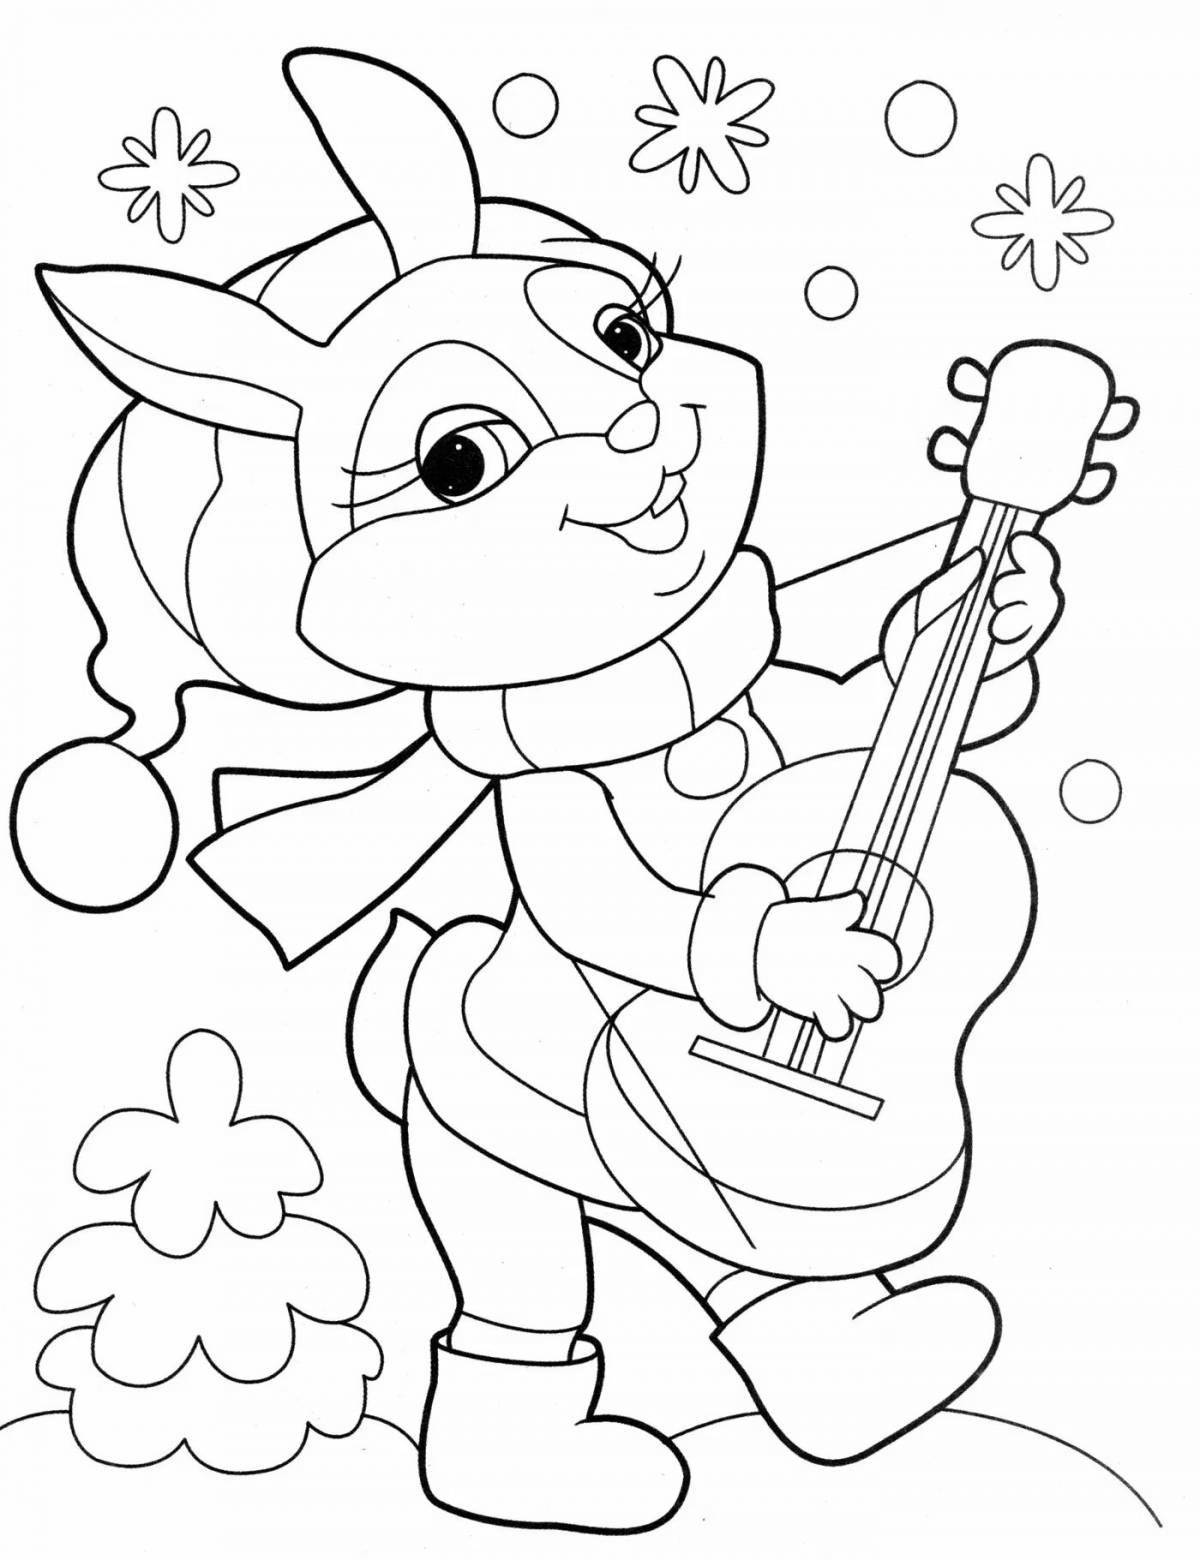 Sparkling Christmas tree and rabbit coloring page